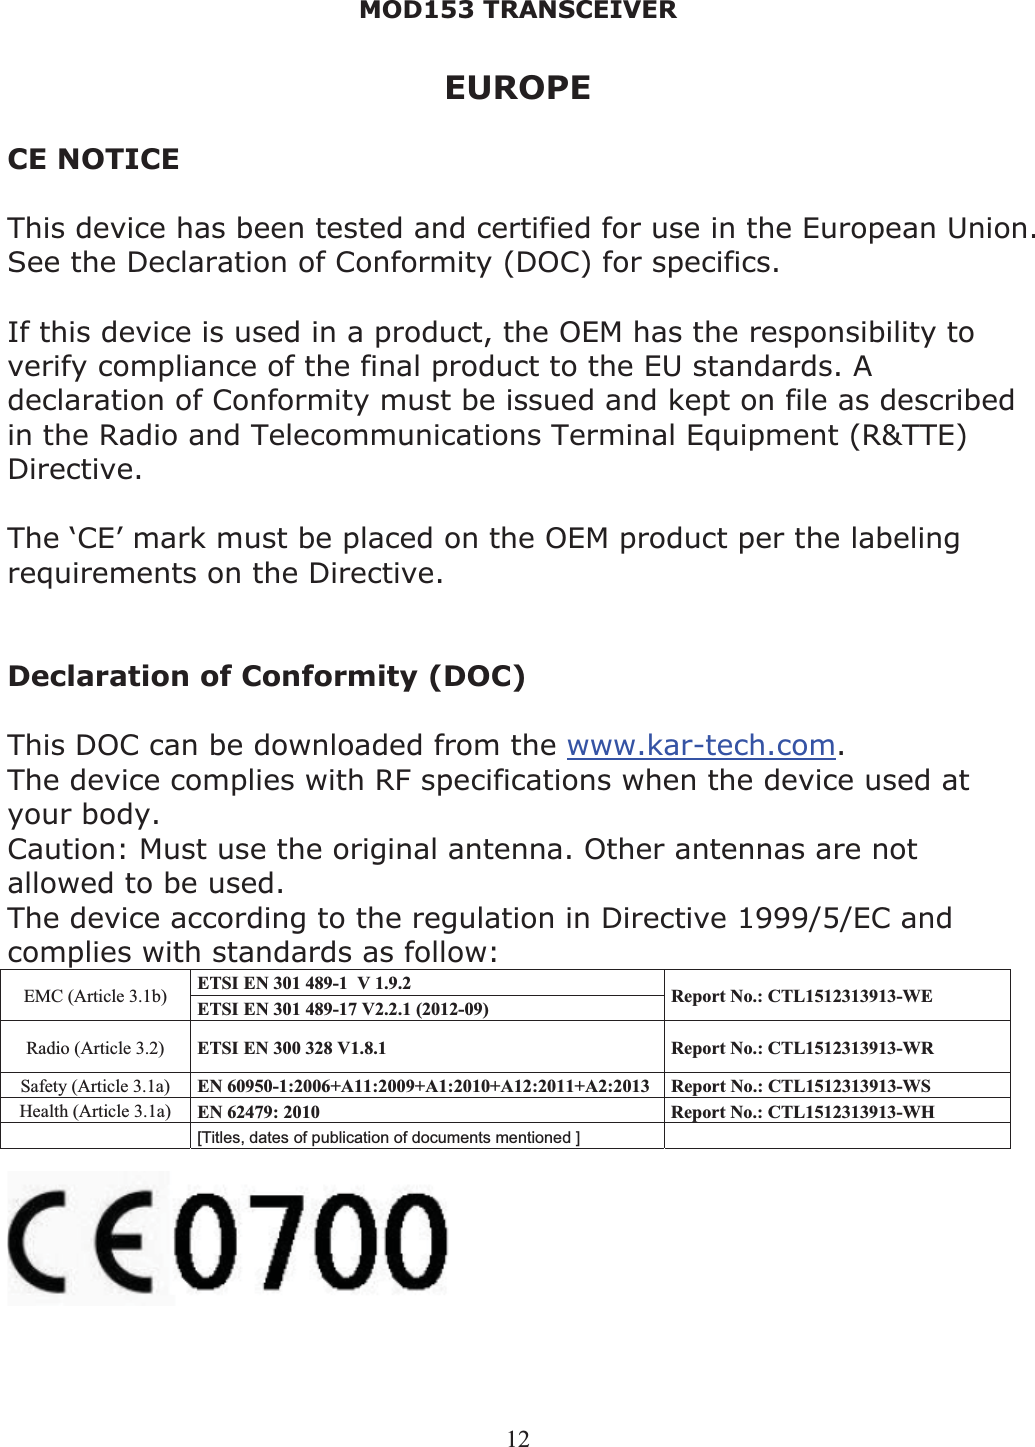 MOD153 TRANSCEIVER 12EUROPE CE NOTICE This device has been tested and certified for use in the European Union. See the Declaration of Conformity (DOC) for specifics. If this device is used in a product, the OEM has the responsibility to verify compliance of the final product to the EU standards. A declaration of Conformity must be issued and kept on file as described in the Radio and Telecommunications Terminal Equipment (R&amp;TTE) Directive. The ‘CE’ mark must be placed on the OEM product per the labeling requirements on the Directive. Declaration of Conformity (DOC) This DOC can be downloaded from the www.kar-tech.com.The device complies with RF specifications when the device used at your body.Caution: Must use the original antenna. Other antennas are not allowed to be used. The device according to the regulation in Directive 1999/5/EC and complies with standards as follow: ETSI EN 301 489-1  V 1.9.2  EMC (Article 3.1b)  ETSI EN 301 489-17 V2.2.1 (2012-09)  Report No.: CTL1512313913-WE Radio (Article 3.2)  ETSI EN 300 328 V1.8.1  Report No.: CTL1512313913-WR Safety (Article 3.1a)  EN 60950-1:2006+A11:2009+A1:2010+A12:2011+A2:2013 Report No.: CTL1512313913-WS Health (Article 3.1a)  EN 62479: 2010  Report No.: CTL1512313913-WH [Titles, dates of publication of documents mentioned ]